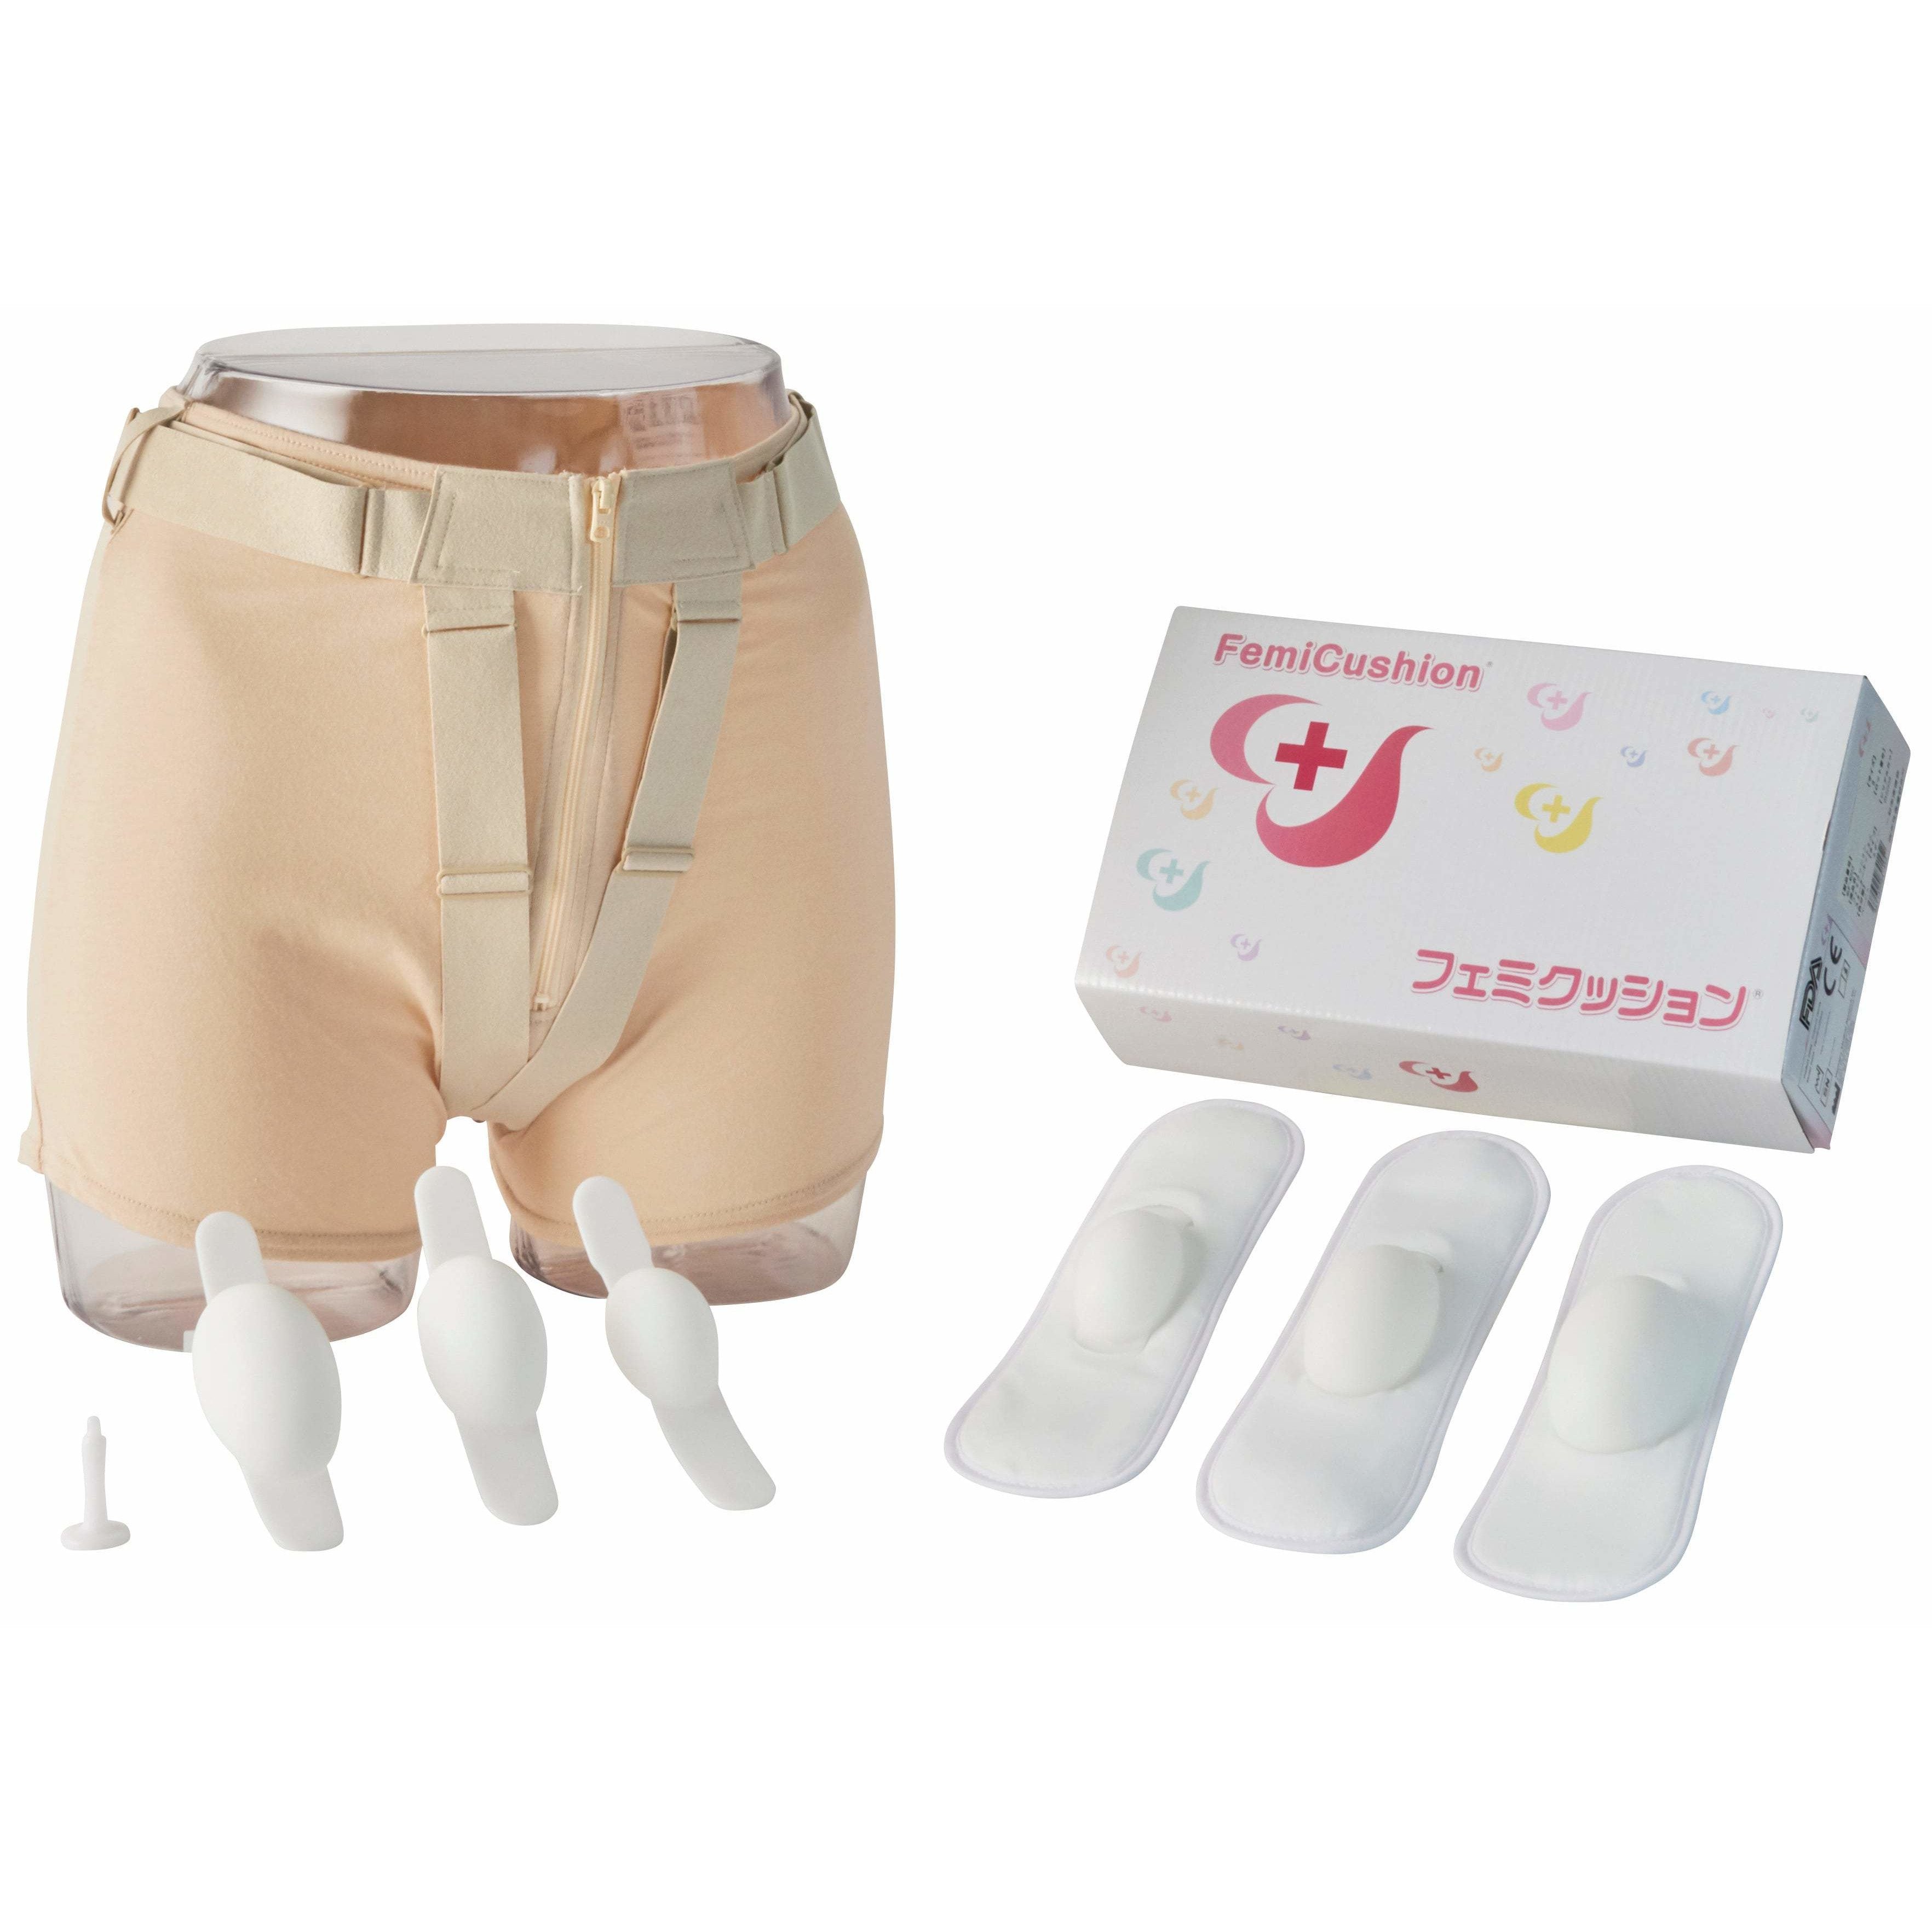 FemiCushion EasyZip Deluxe Kit - Bladder and Uterine Prolapse Relief